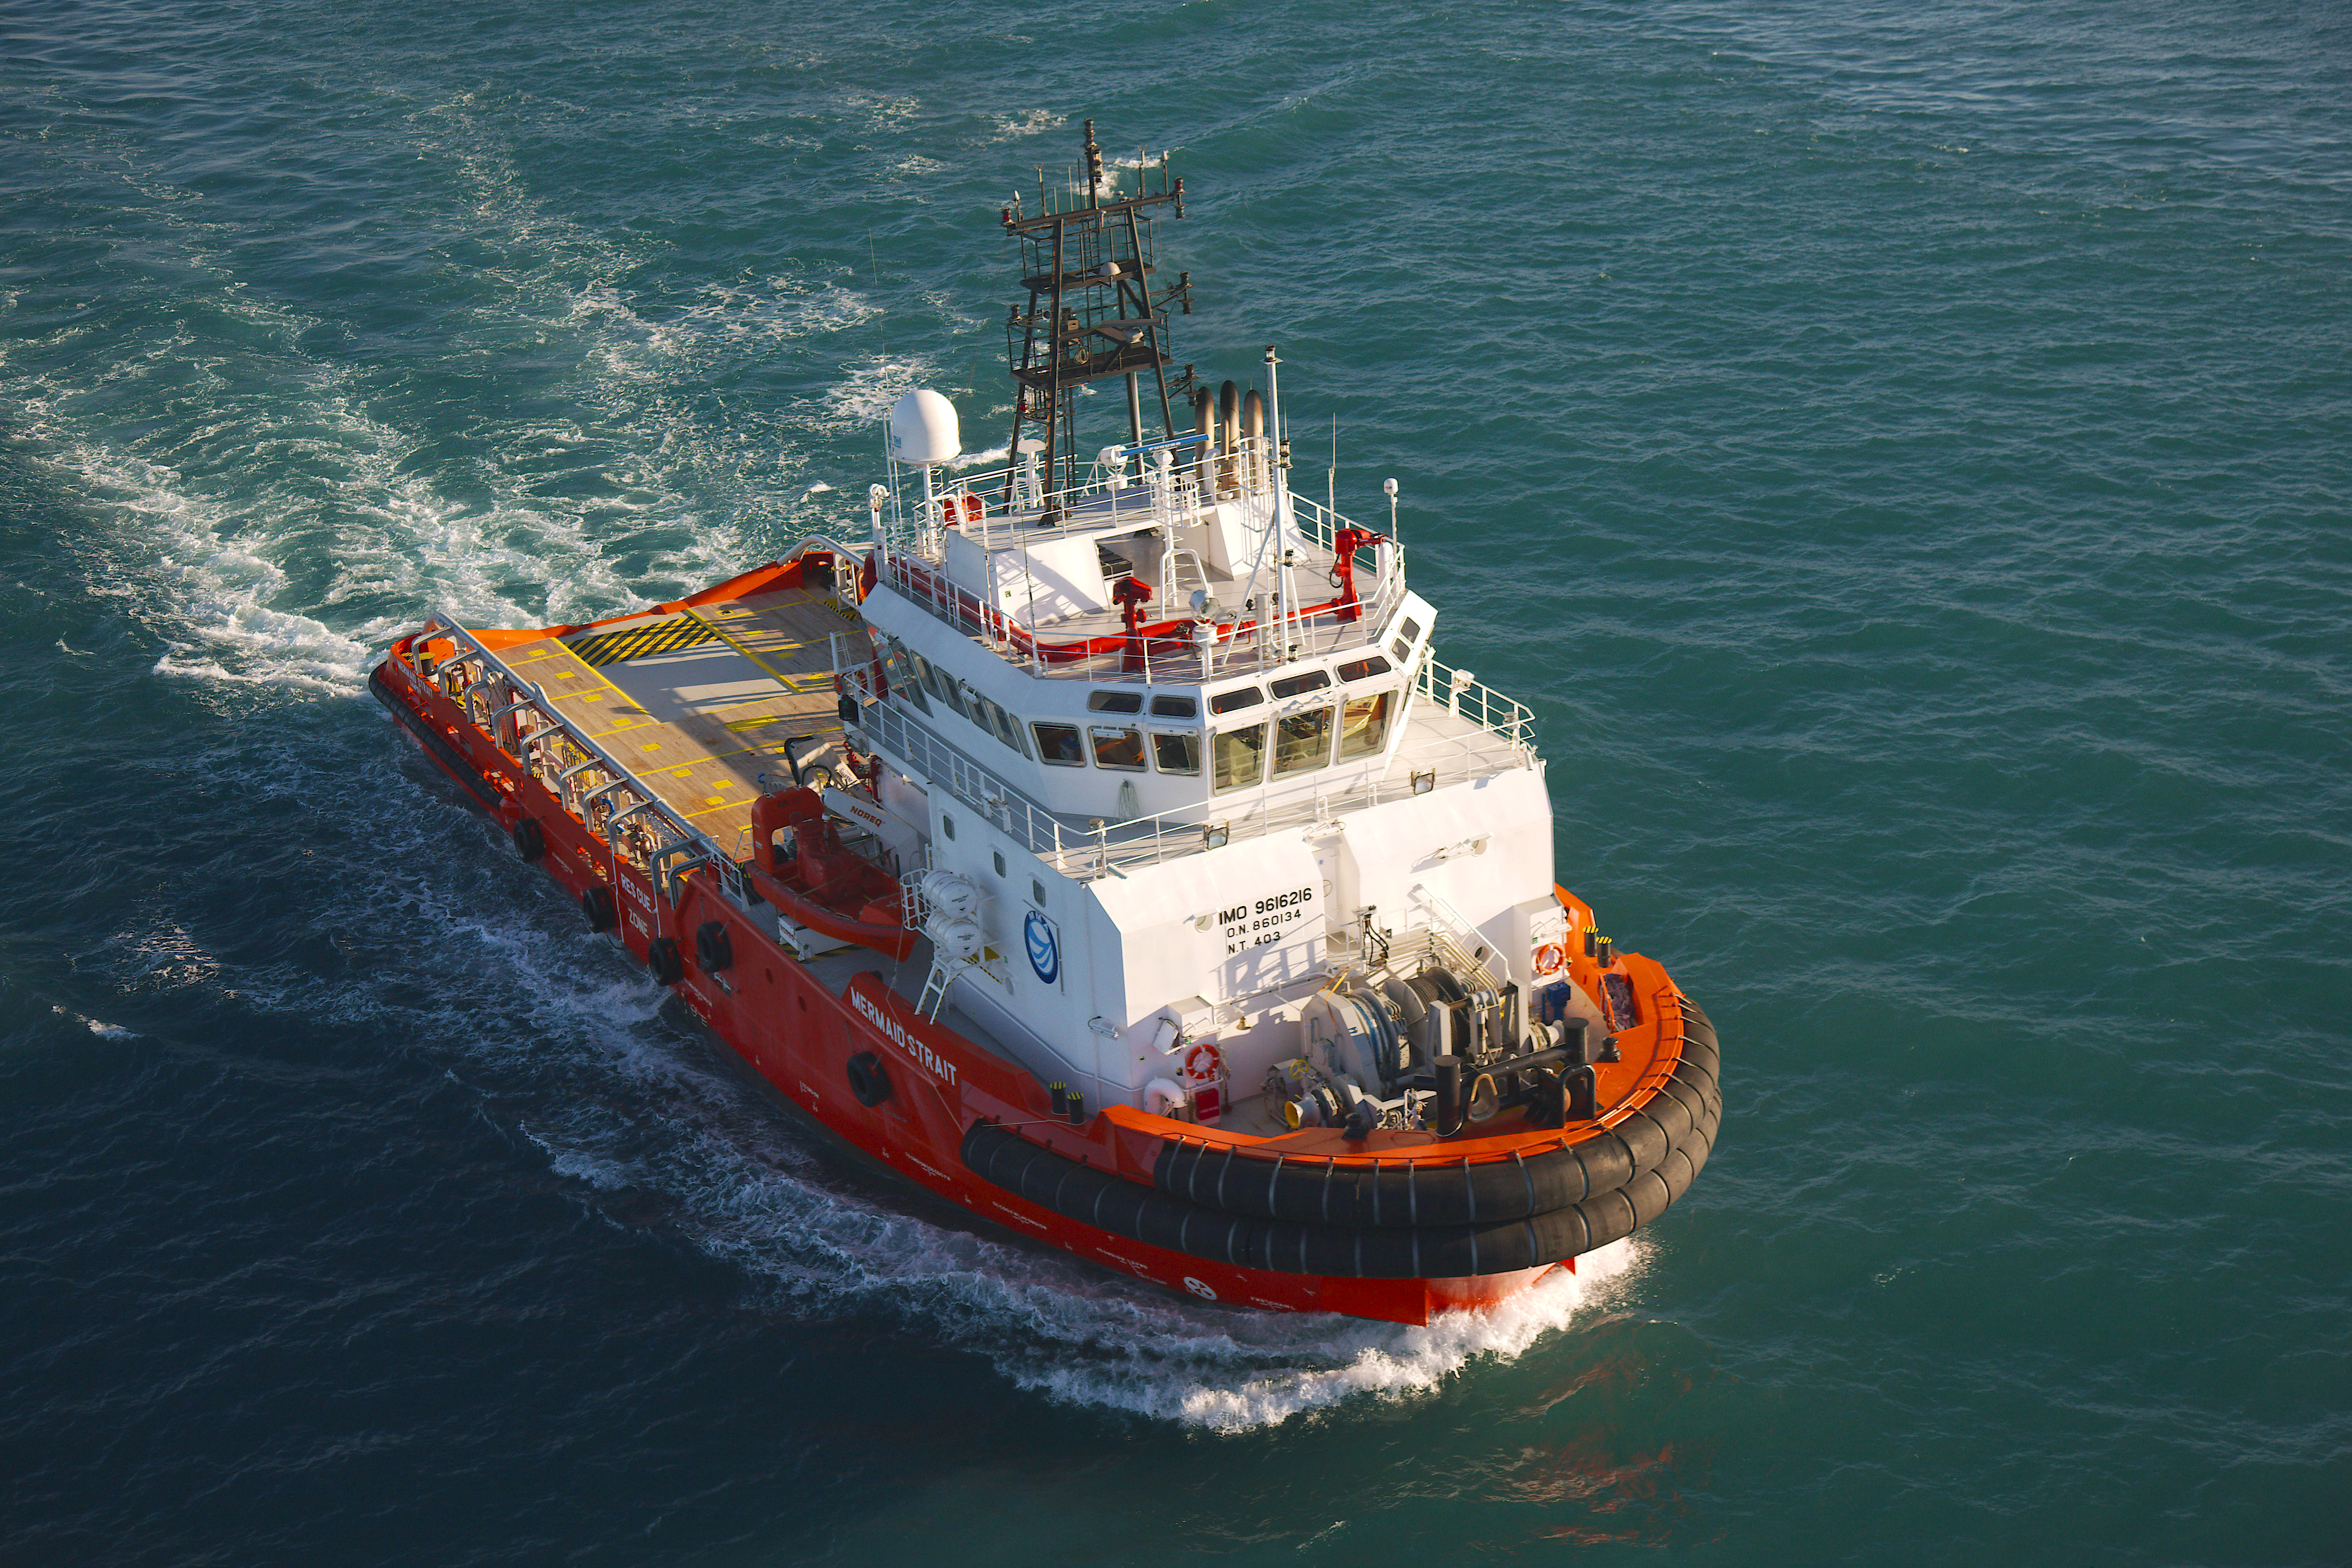 /sites/mmaoffshorecomau//assets/public/image/ProductListing/Aerials_boat_formations-51.jpg